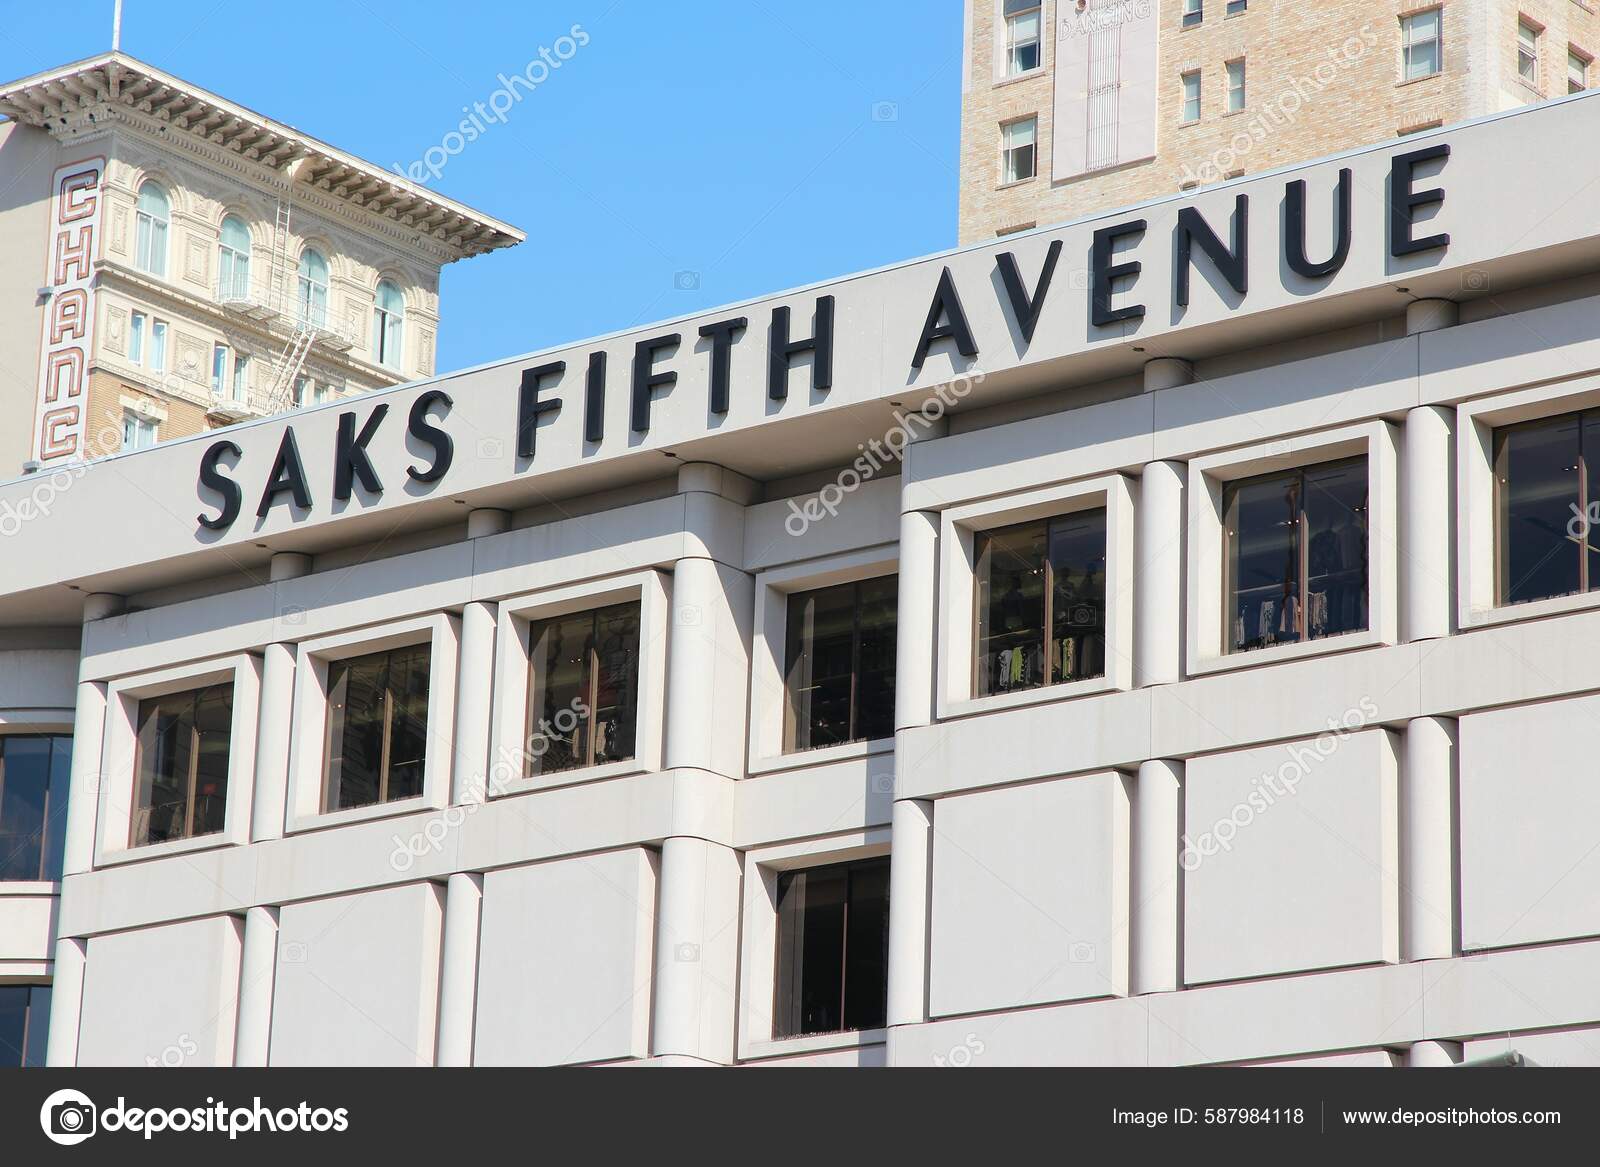 The Department Store Museum: Saks Fifth Avenue, New York City, New